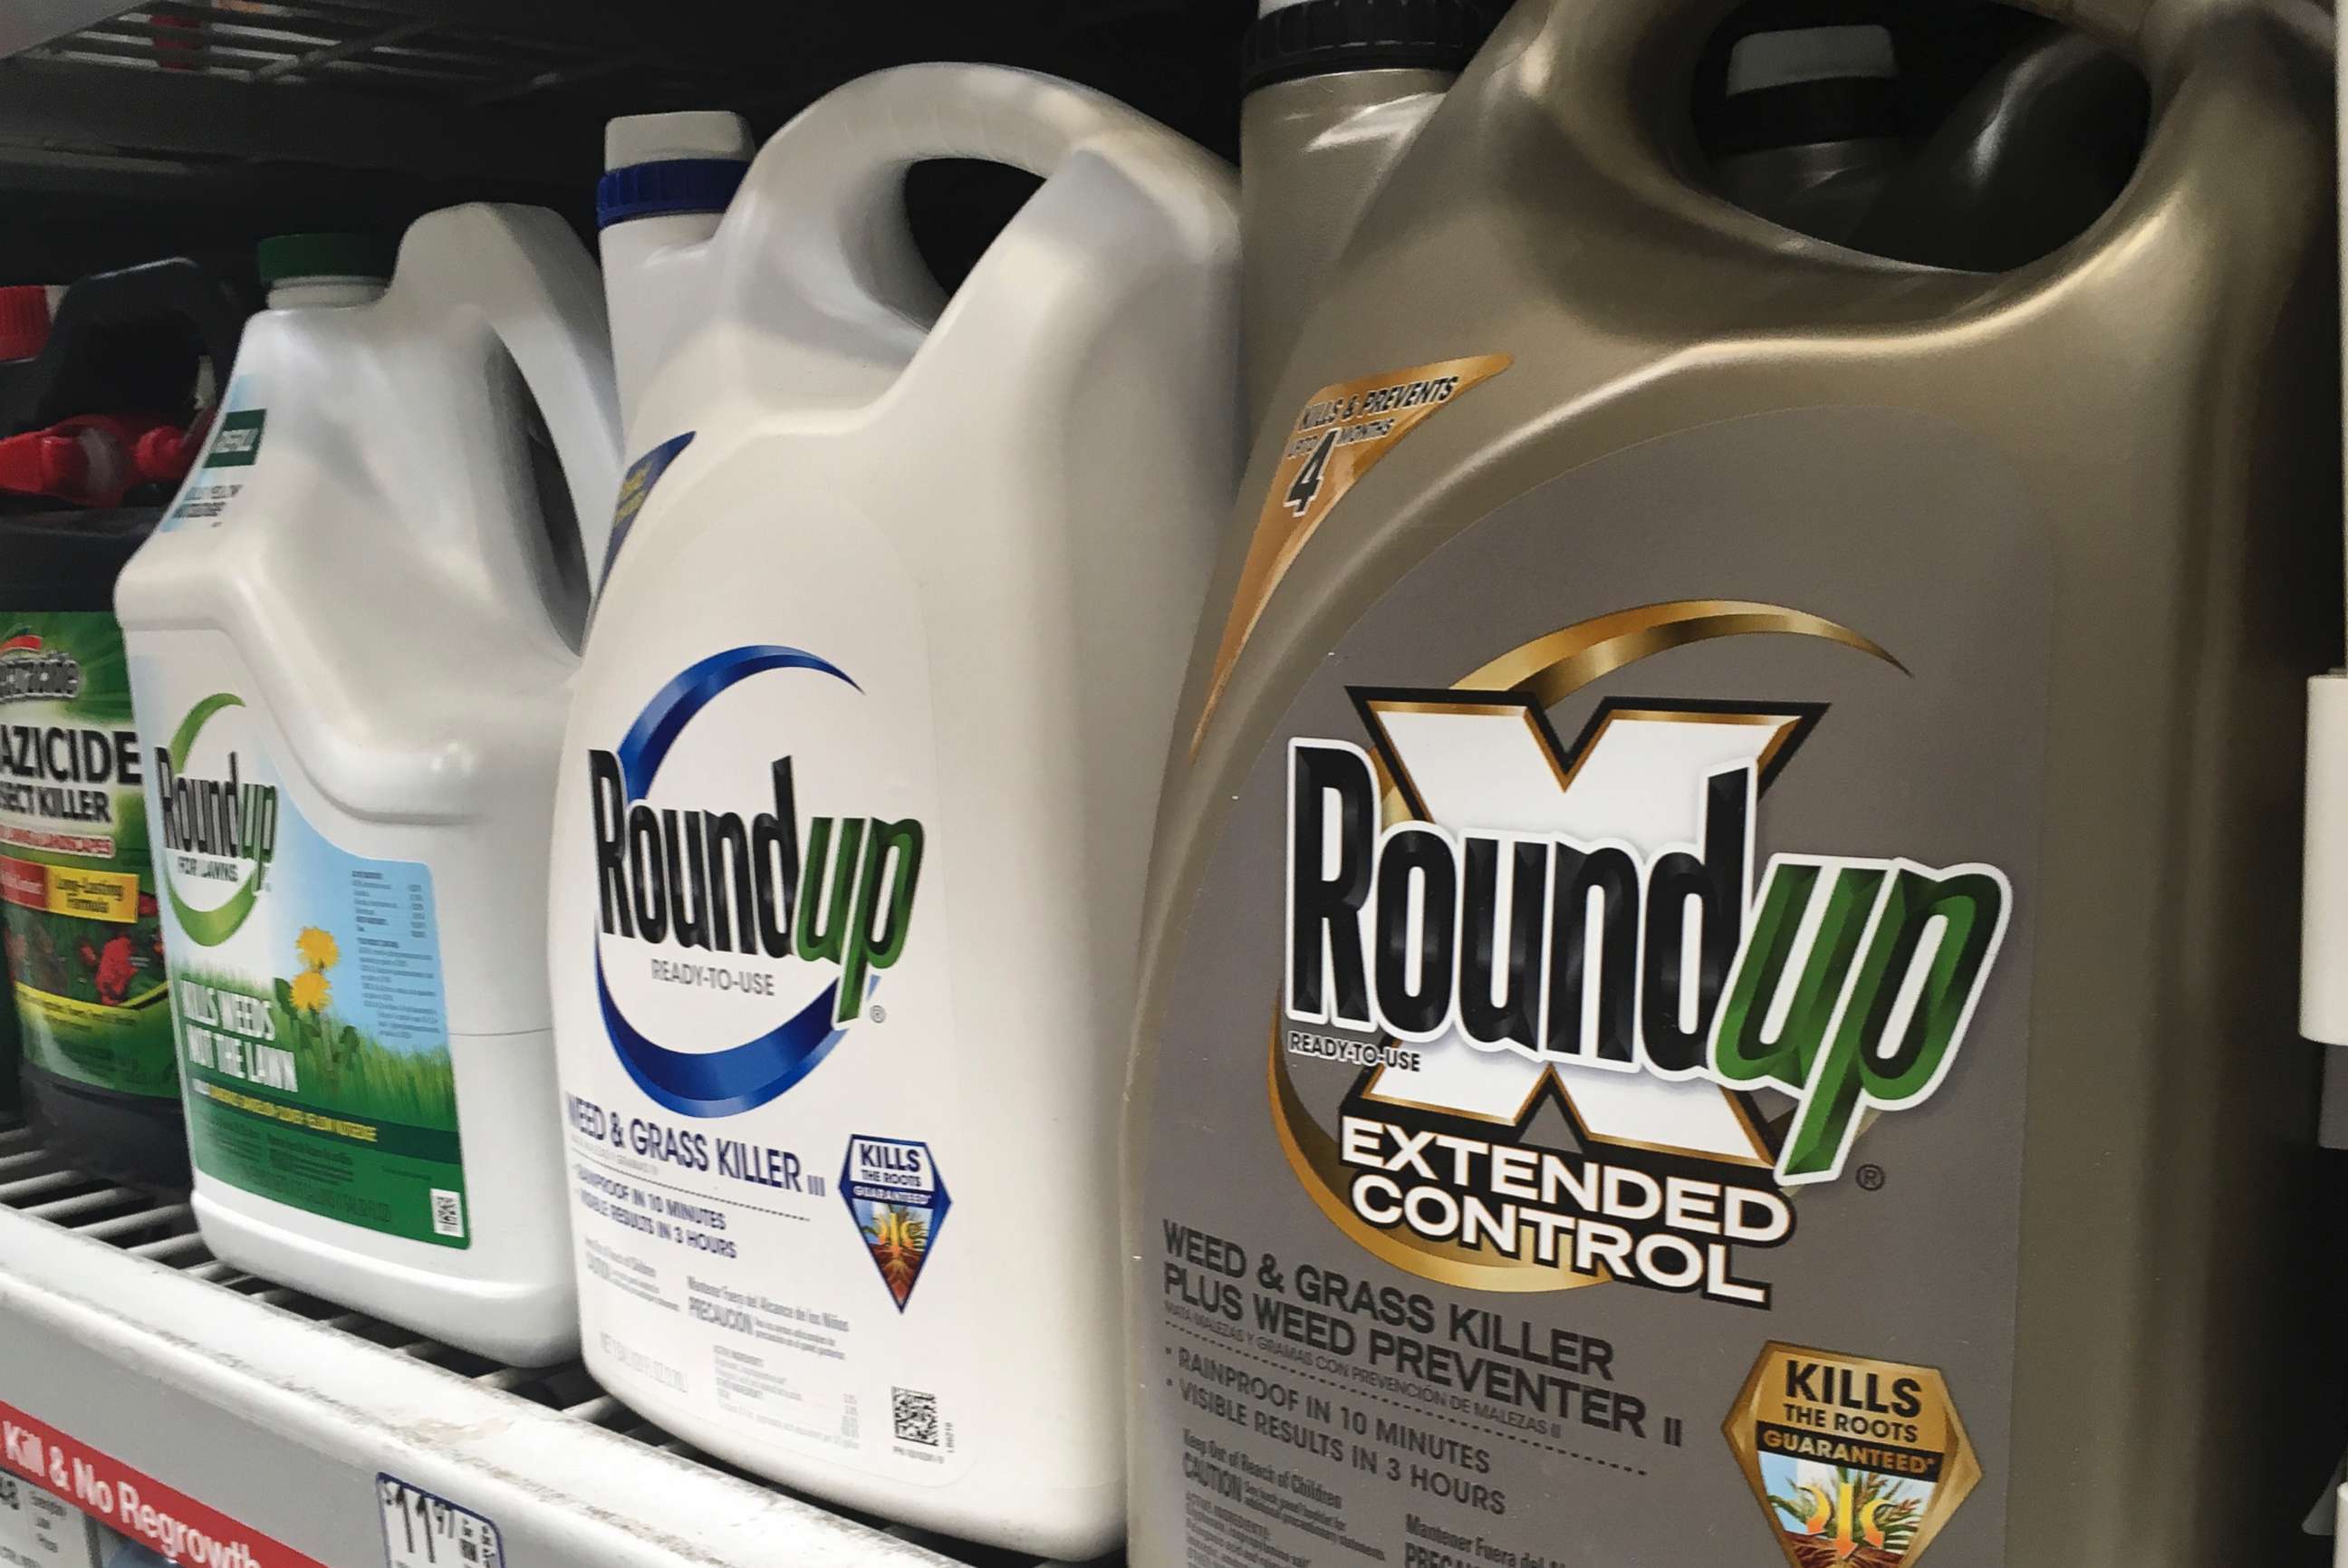 PHOTO: Containers of Roundup are displayed on a store shelf in San Francisco, Feb. 24, 2019. A jury in federal court in San Francisco has concluded that Roundup weed killer was a substantial factor in a California man's cancer.  